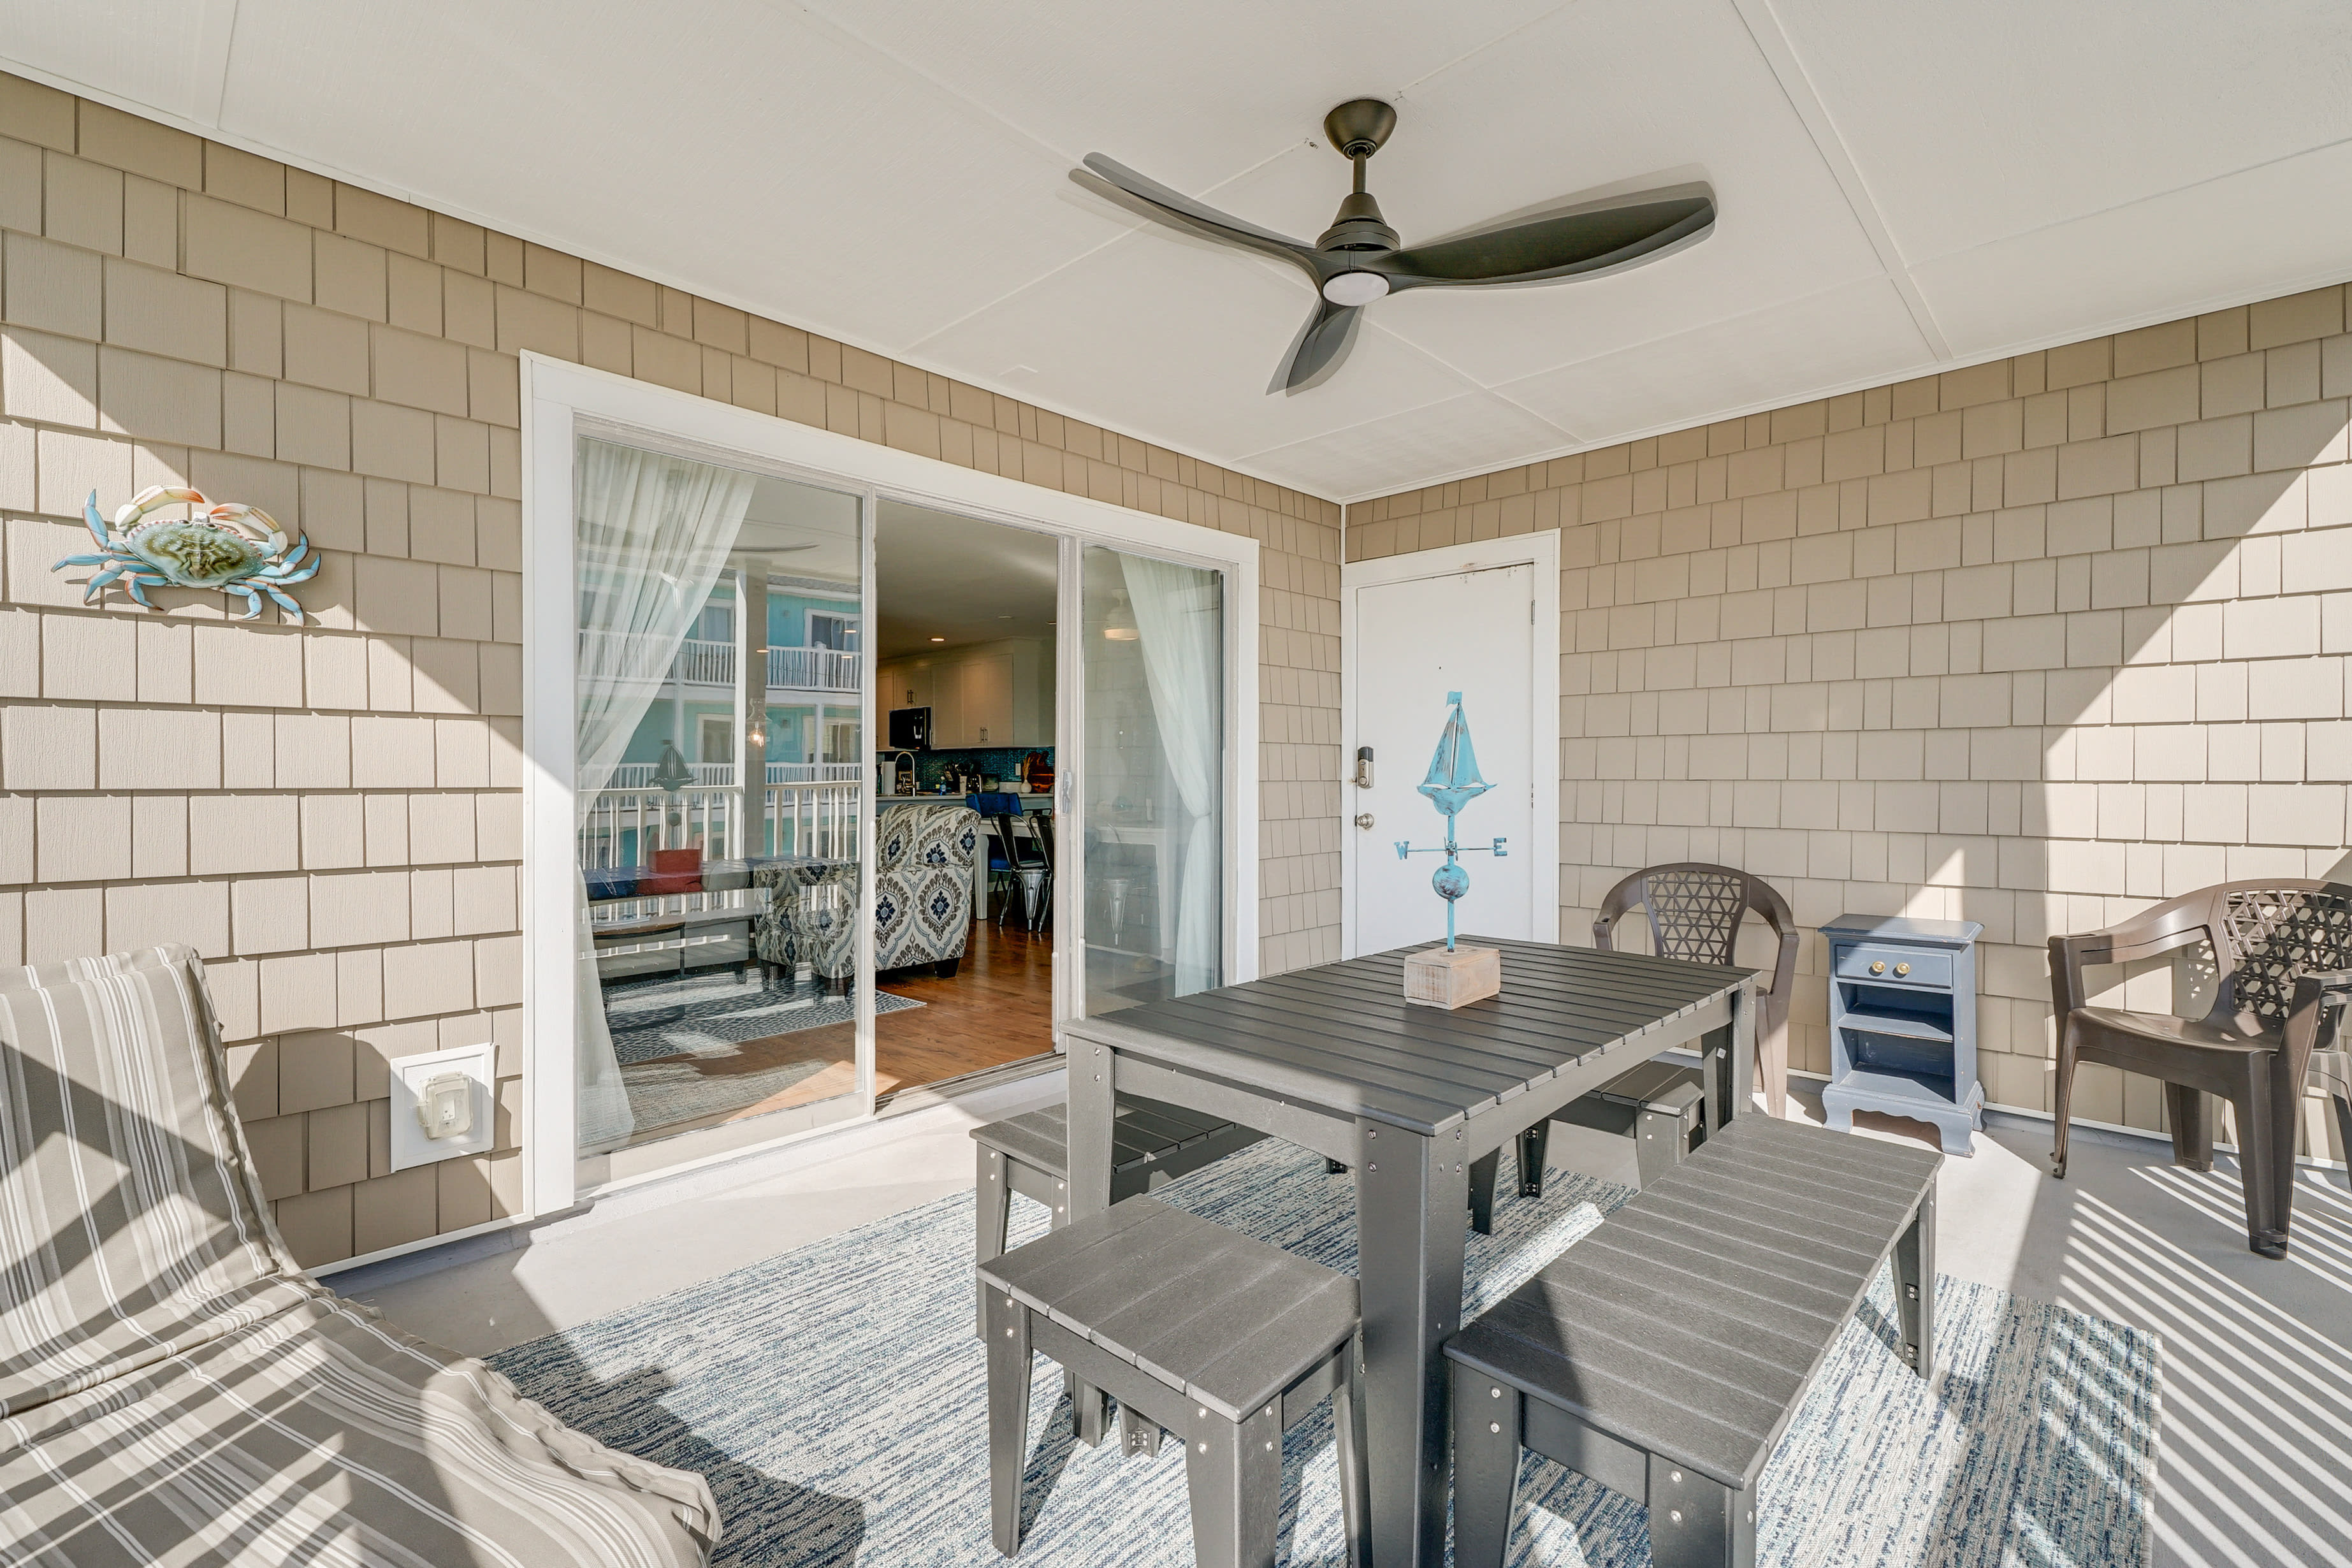 Covered Deck | Ocean View | Outdoor Dining Area | Ceiling Fan